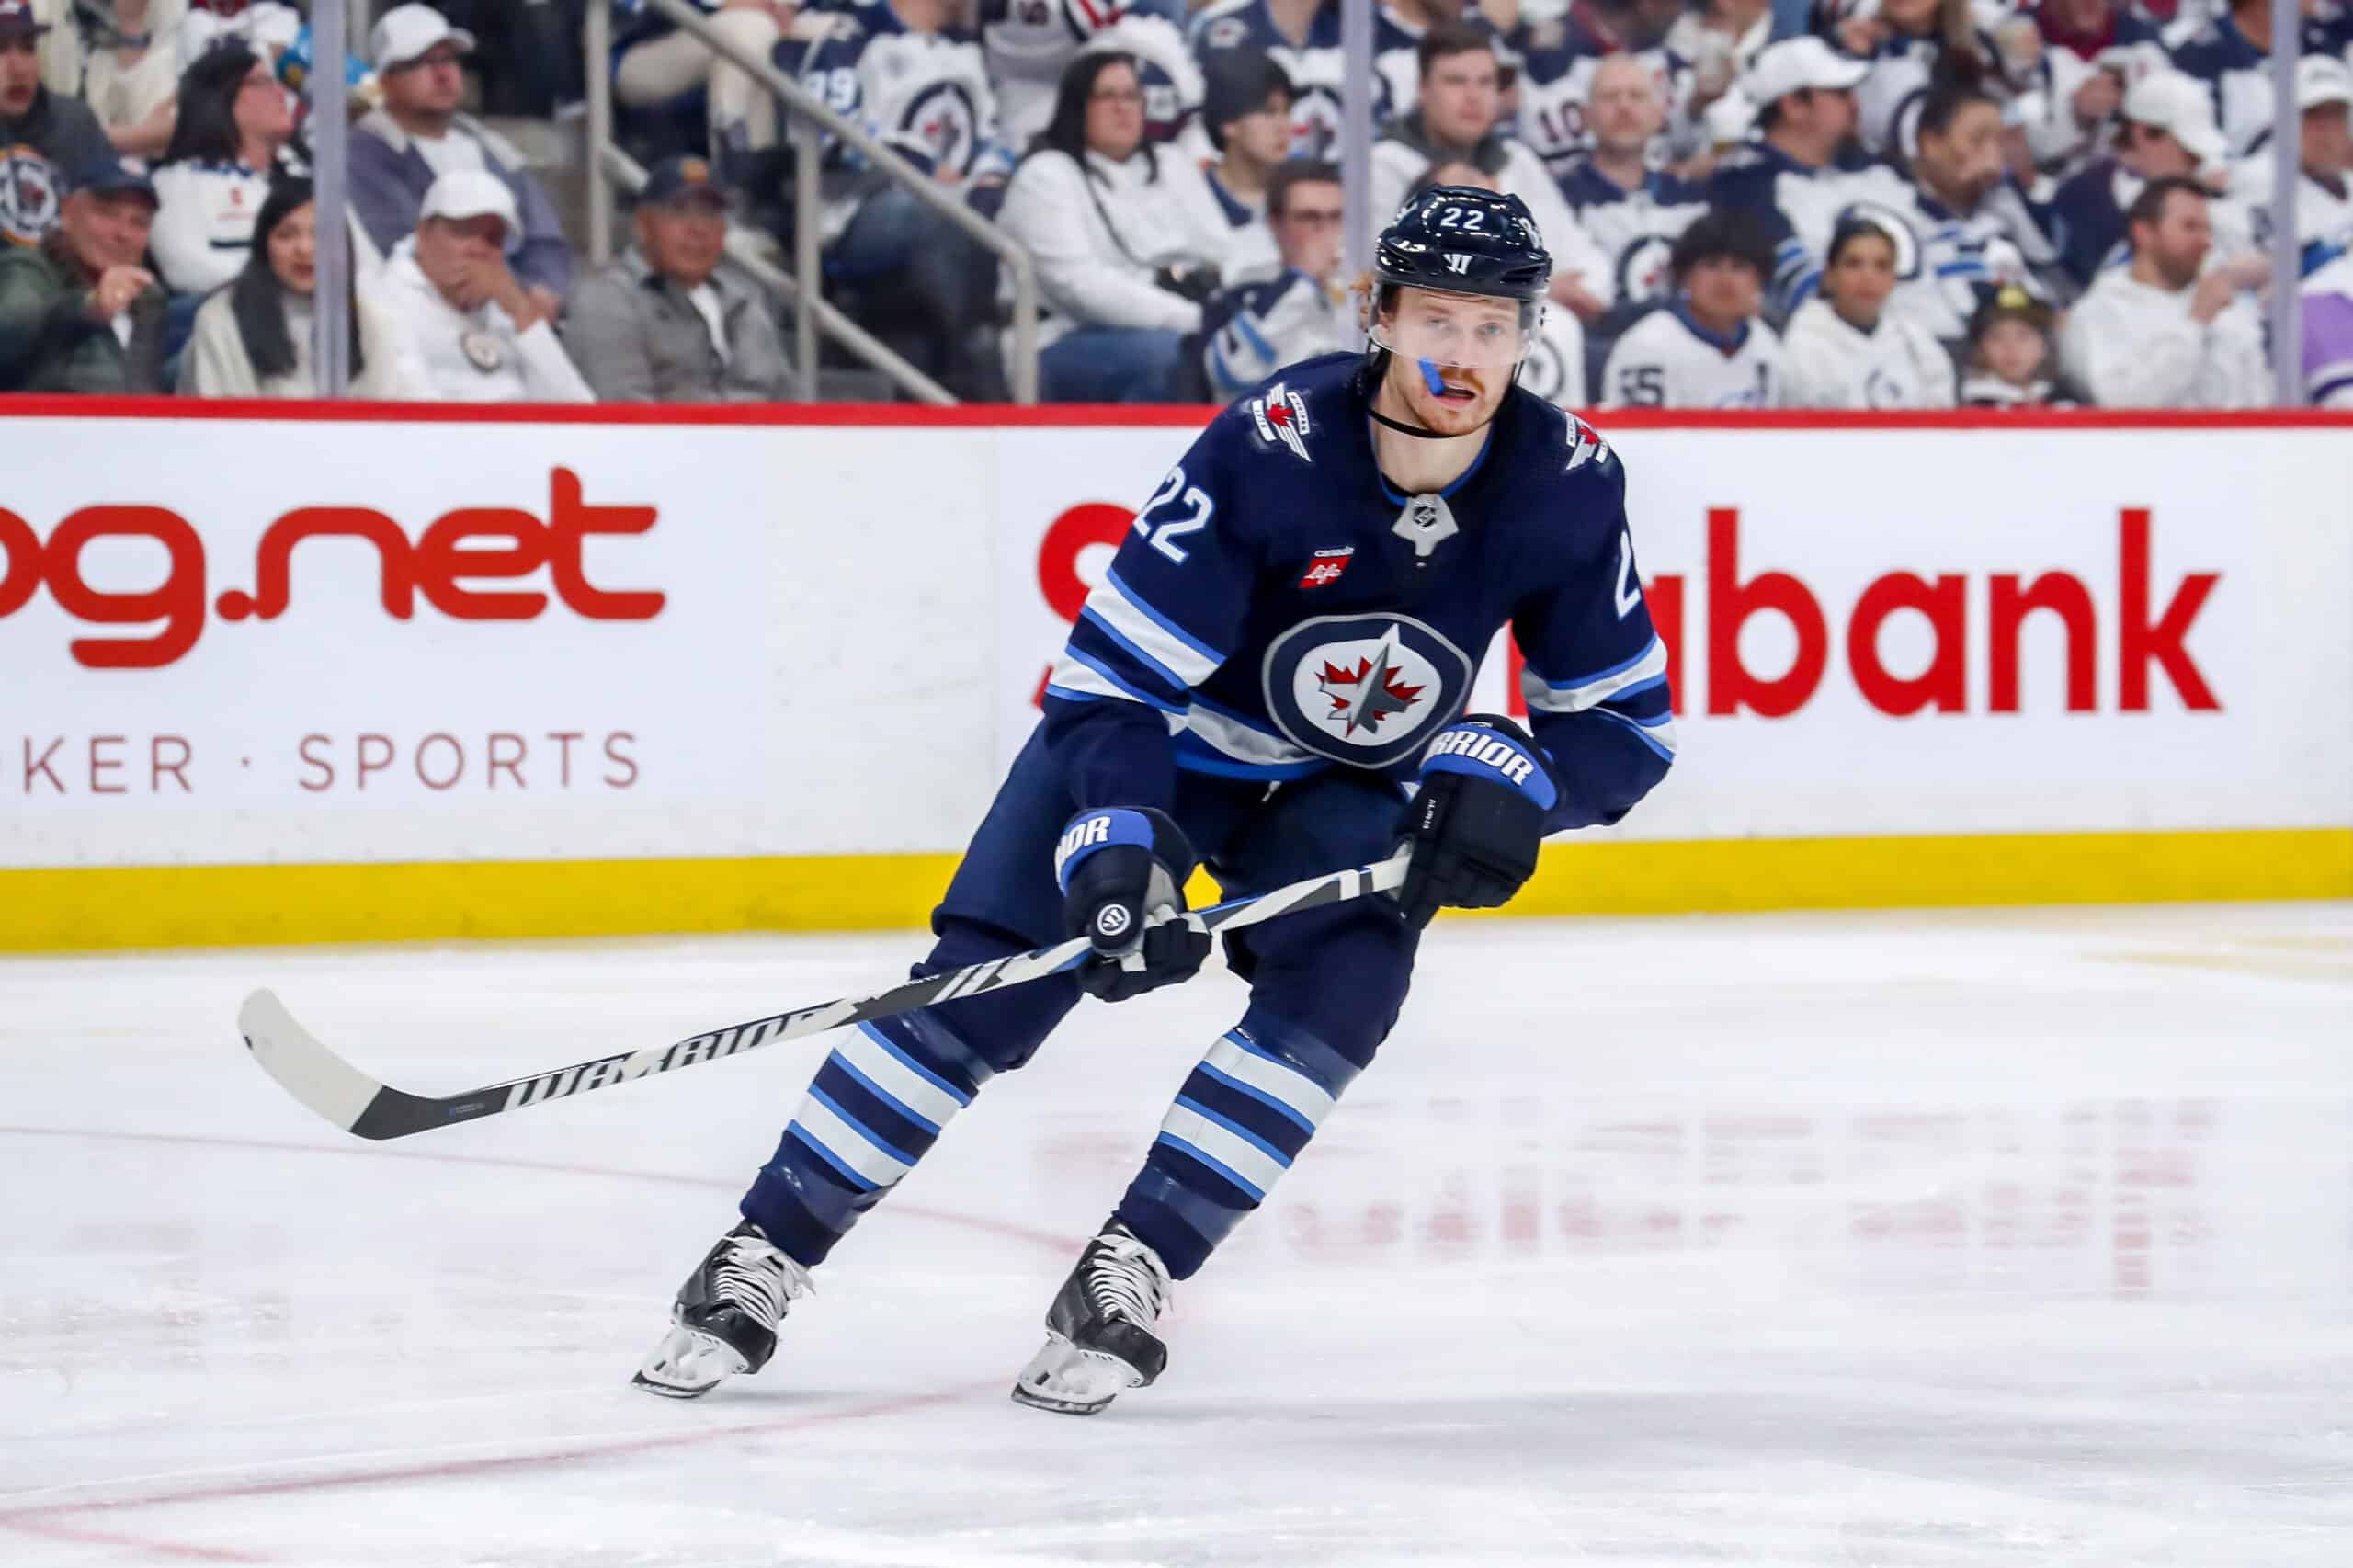 APRIL 30: Mason Appleton #22 of the Winnipeg Jets keeps an eye on the play during second period action against the Colorado Avalanche in Game Five of the First Round of the 2024 Stanley Cup Playoffs at the Canada Life Centre on April 30, 2024 in Winnipeg, Manitoba sports betting, Canada. The Avs defeated the Jets 6-3 and win the series 4-1. (Photo by Darcy Finley/NHLI via Getty Images)